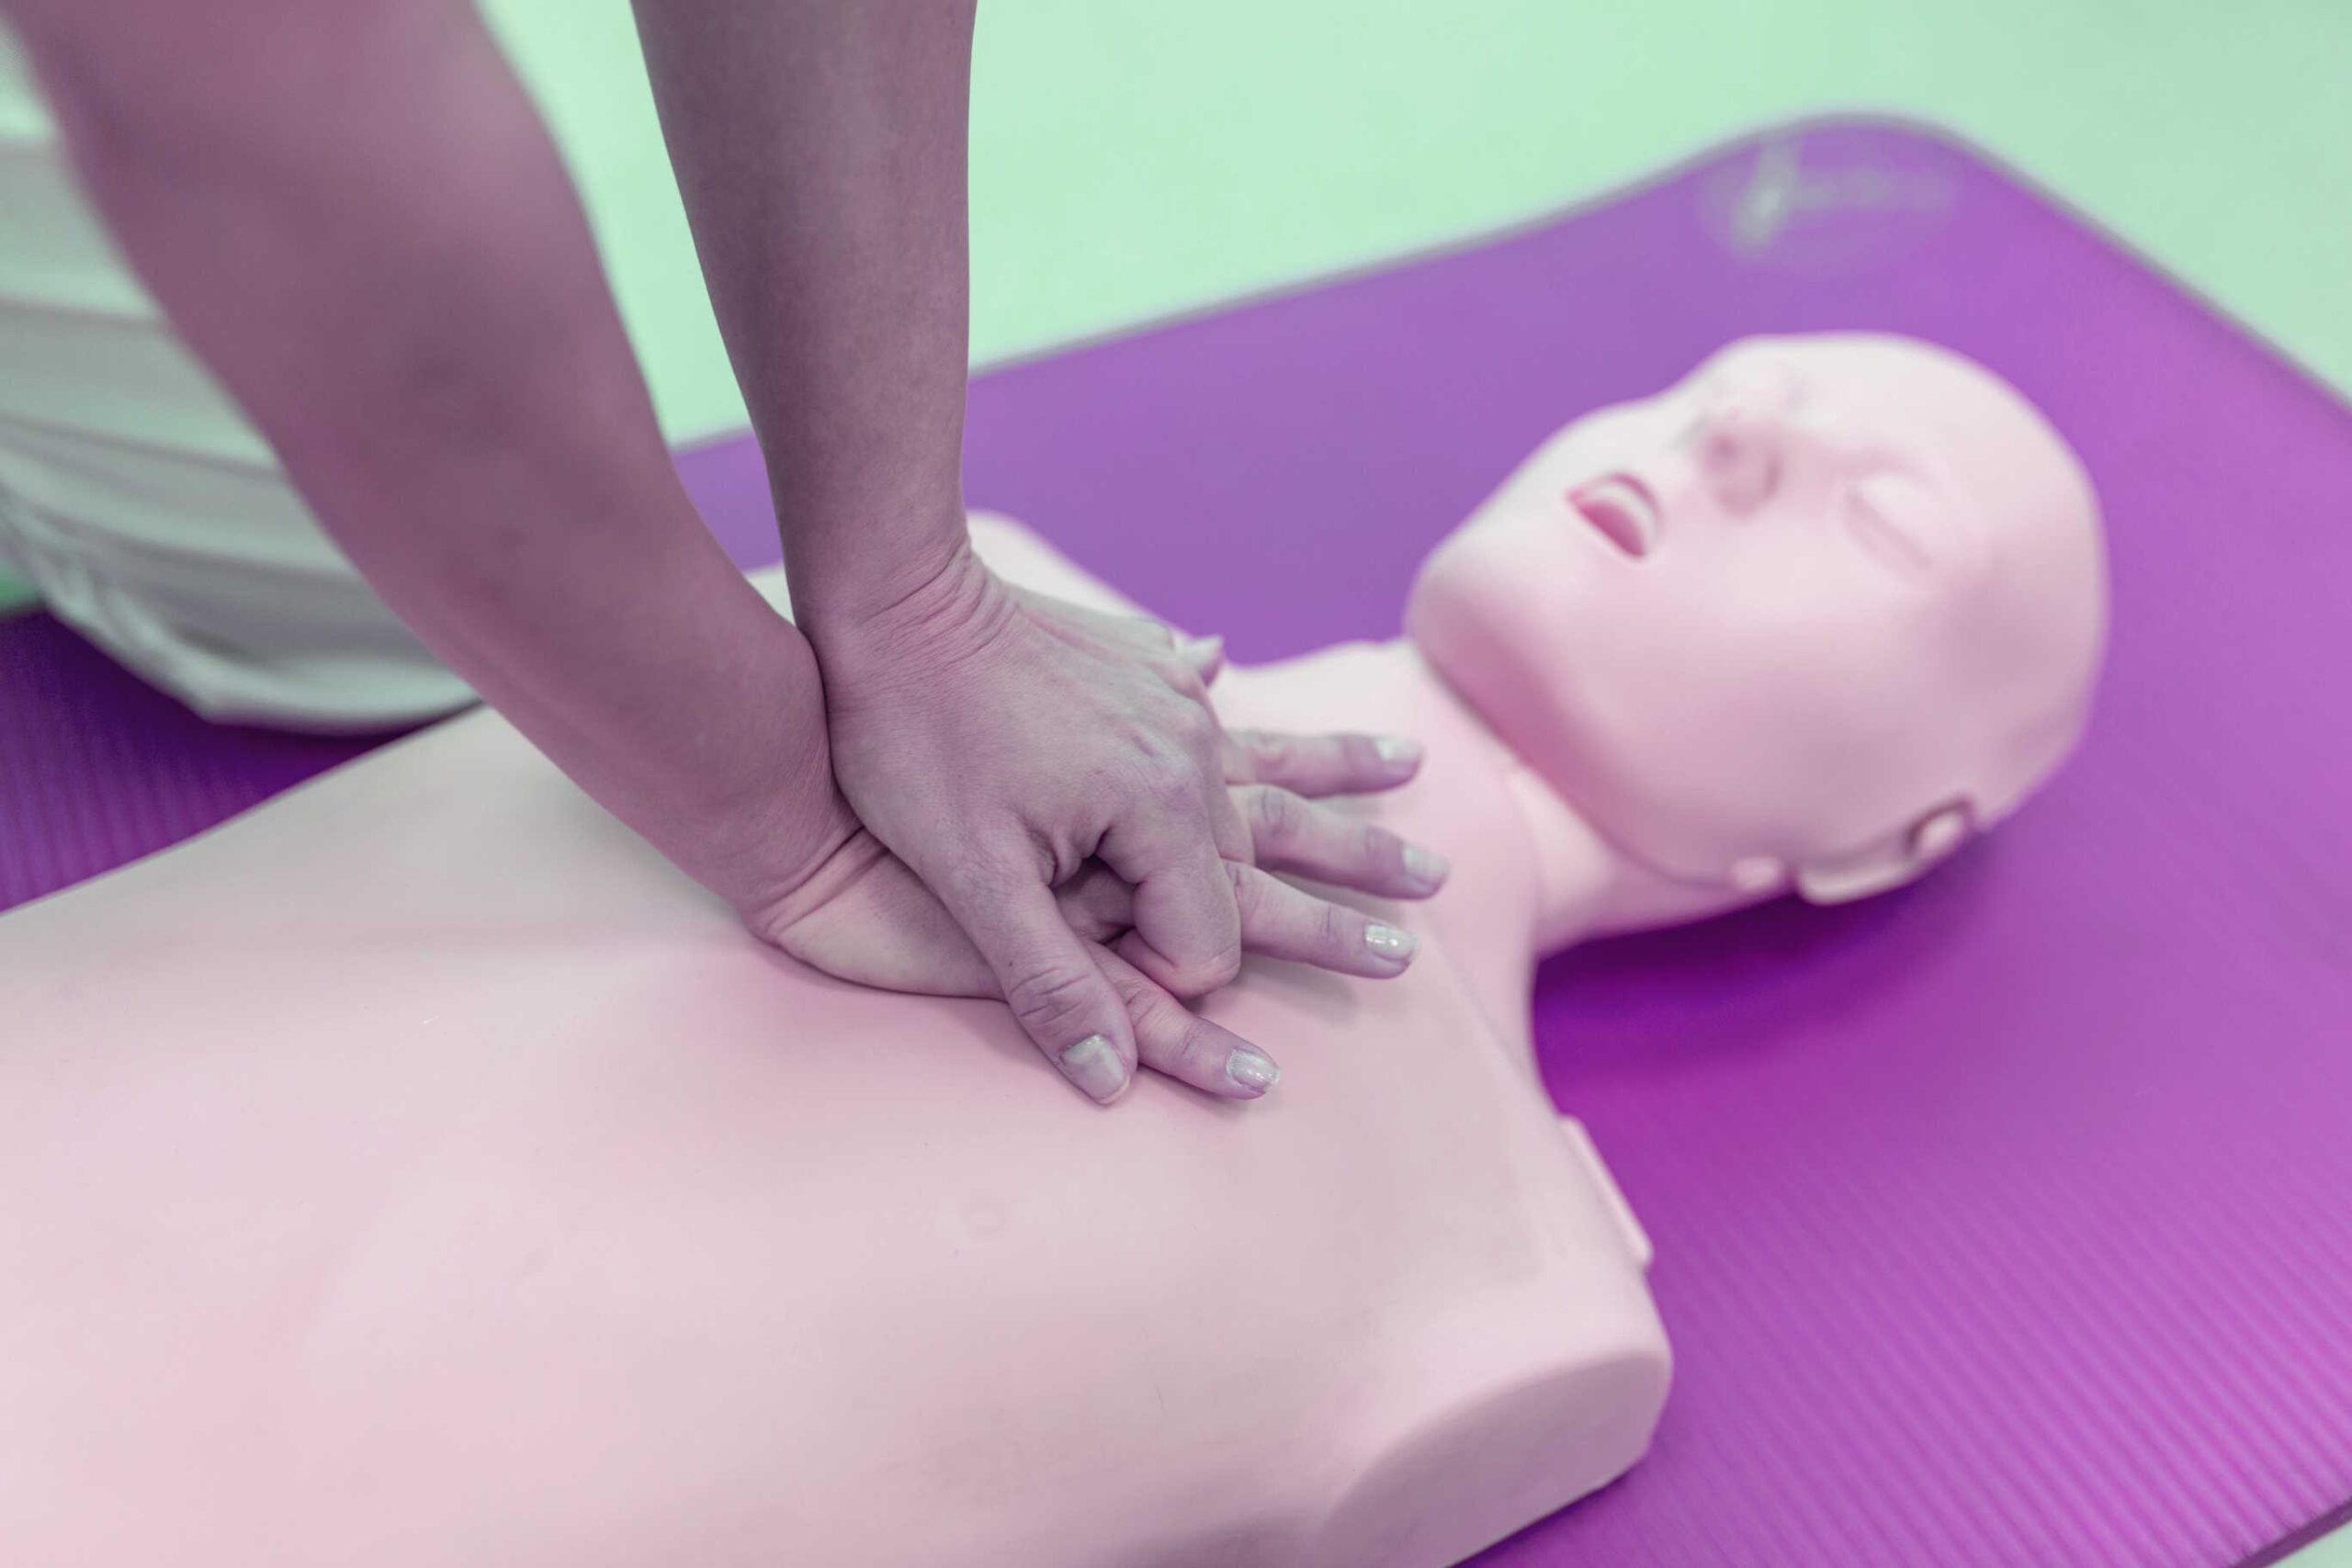 CPR Training done on a Dummy - Epitome Hospitals